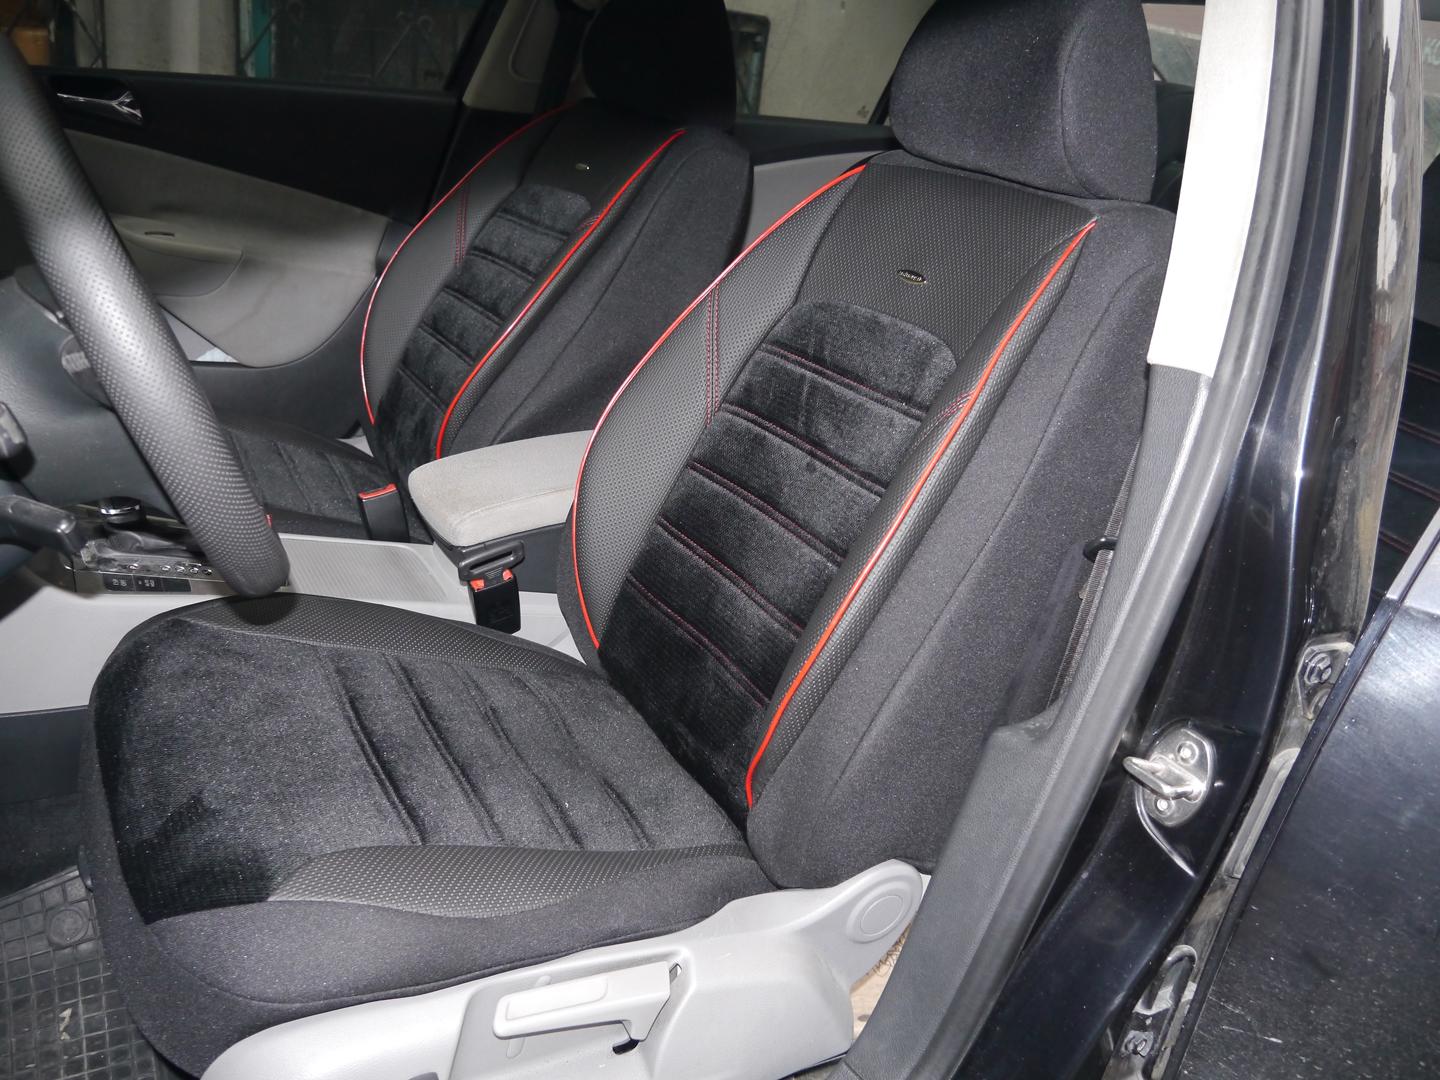 Car Seat Covers Protectors For Vw Golf Mk7 Variant No4a - Genuine Vw Golf Mk7 Rear Seat Covers